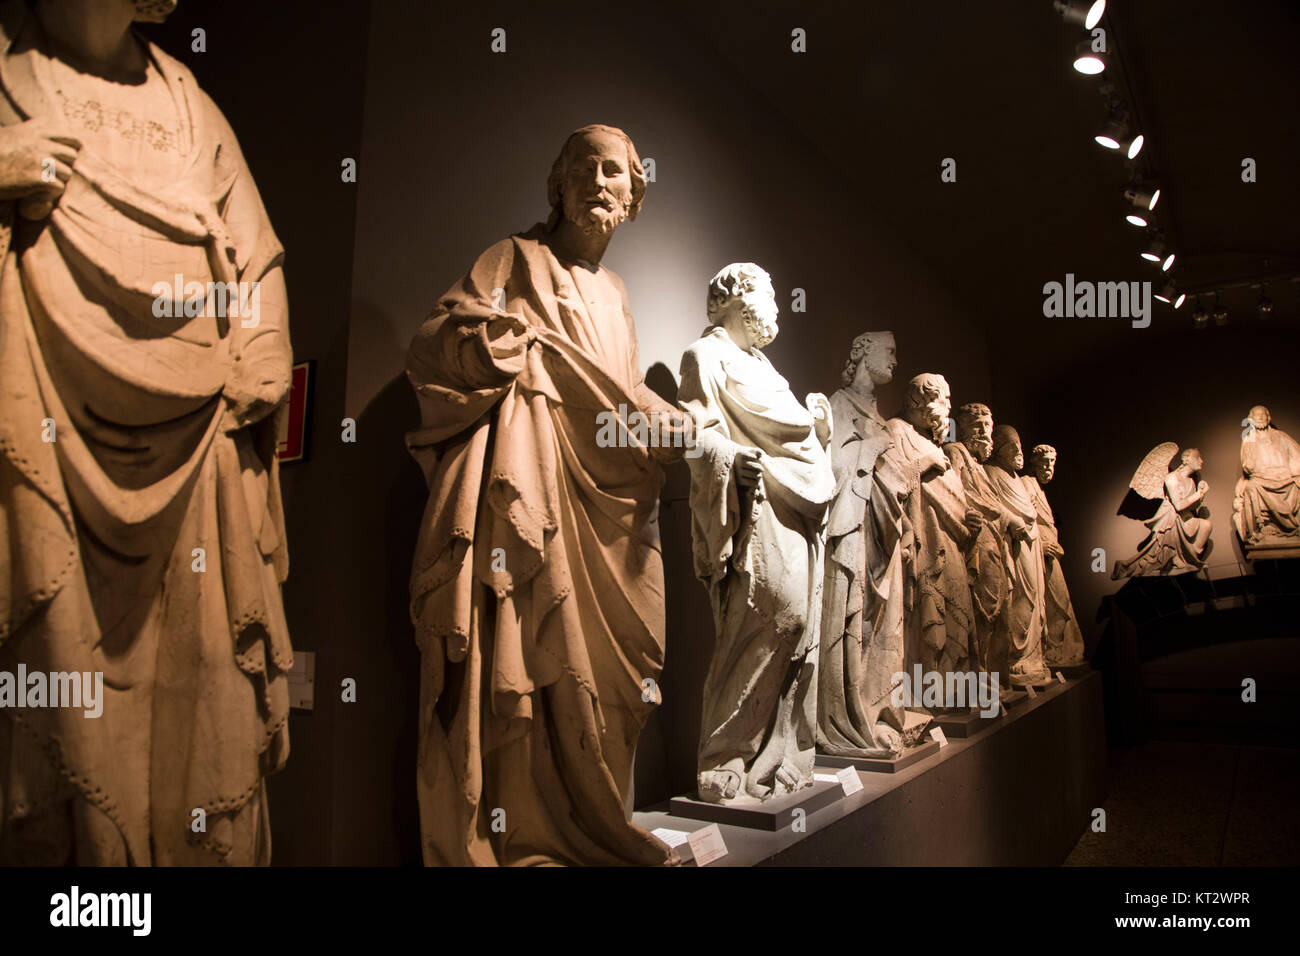 Historical statues reside inside the Siena Cathedral or Santa Maria Assunta Cathedral in Siena, Italy. Stock Photo